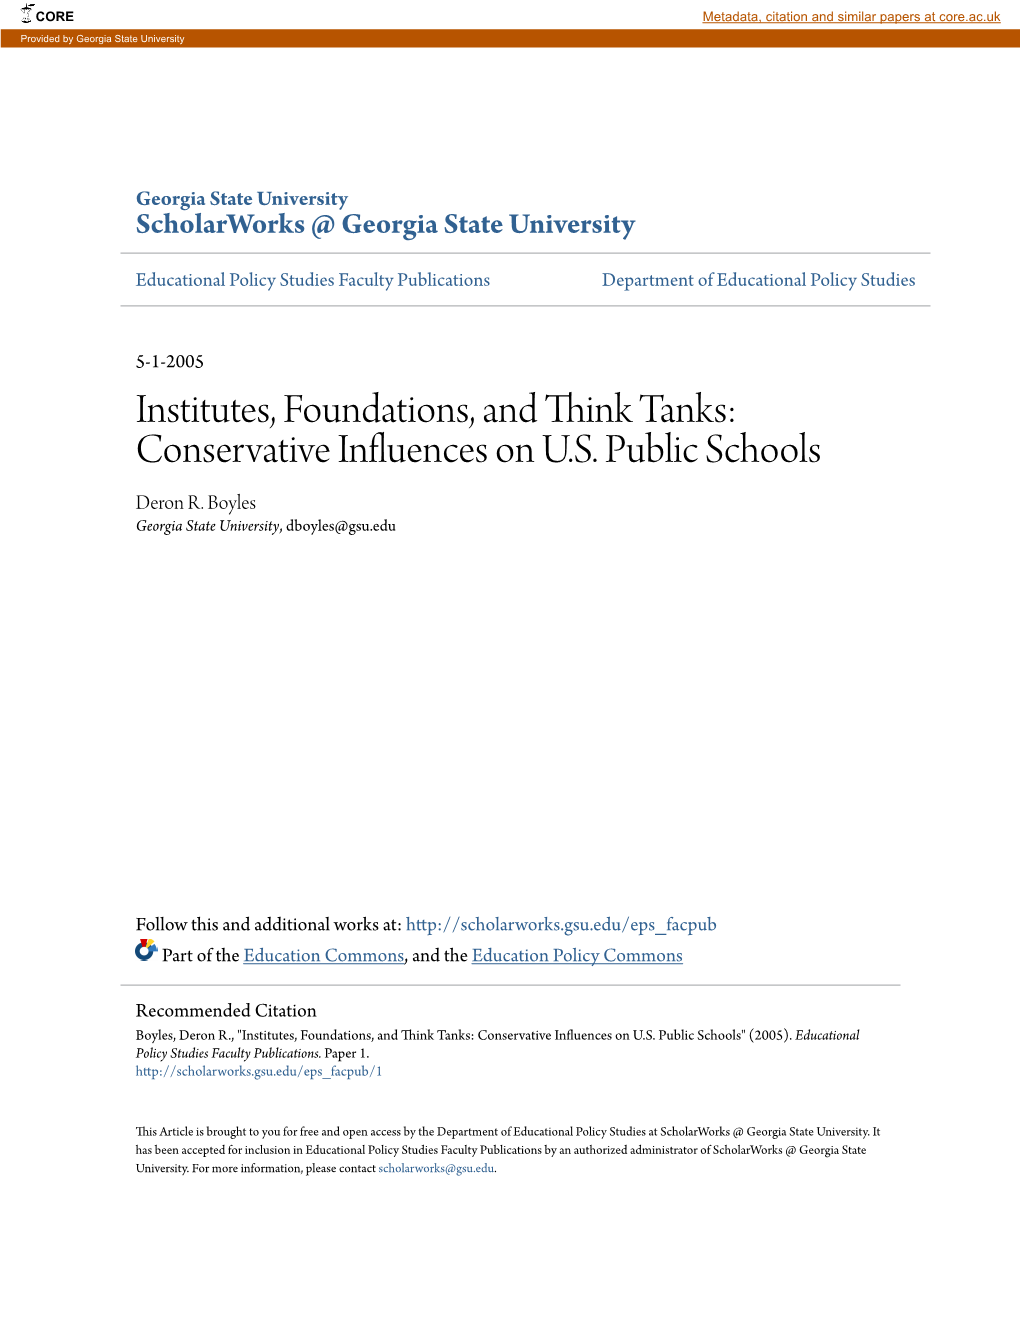 Institutes, Foundations, and Think Tanks: Conservative Influences On